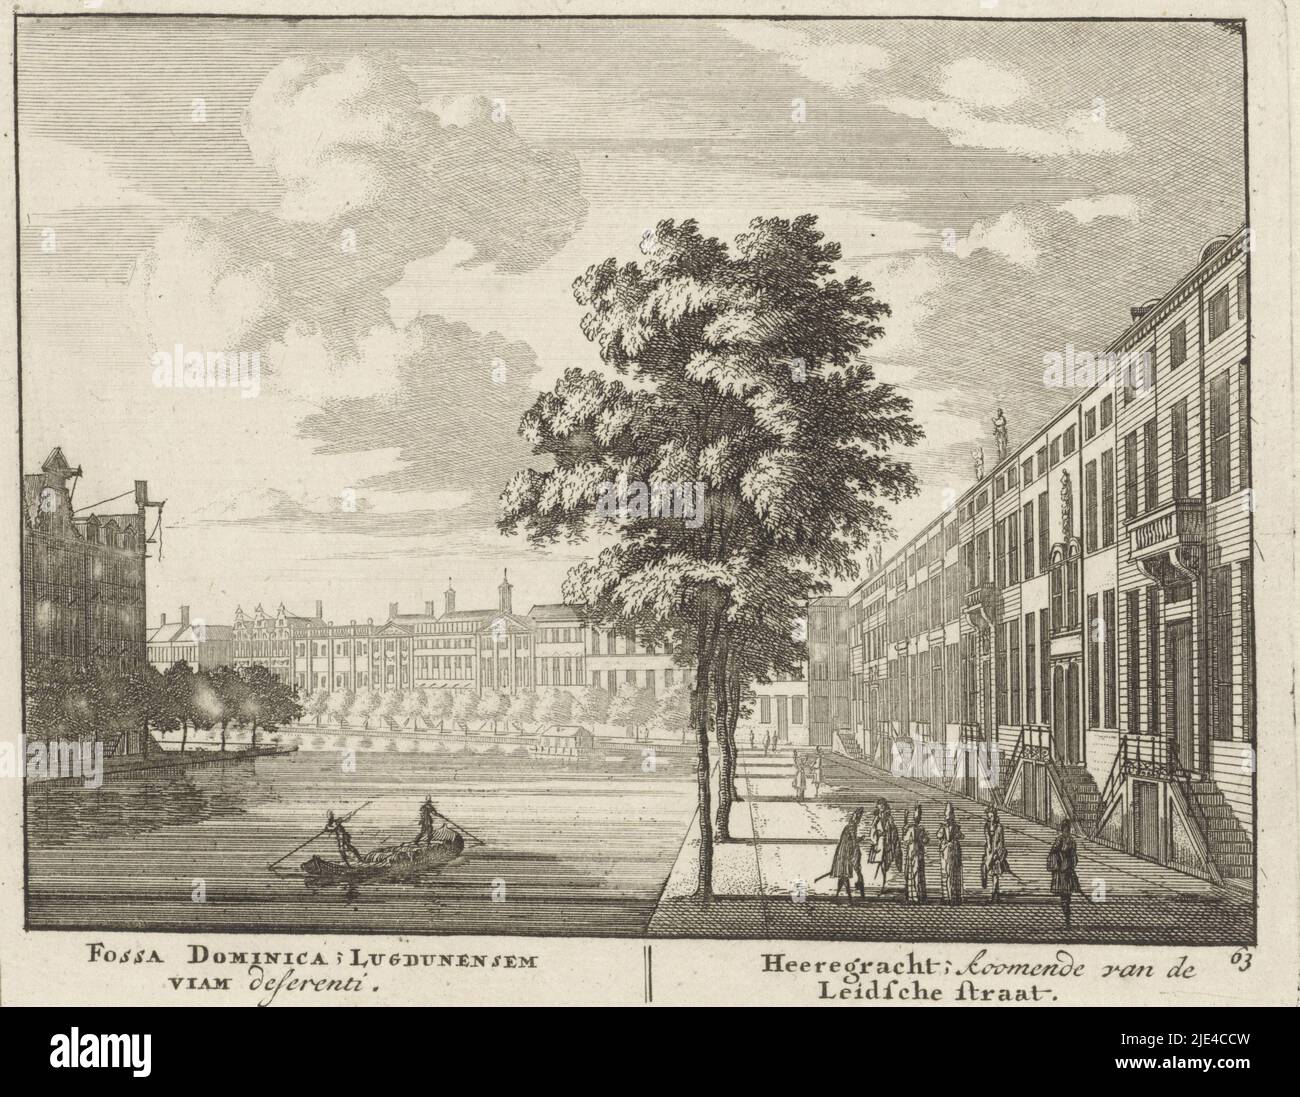 View of the Herengracht, coming from te Leidsestraat, Jan van Call (I), Pieter Schenk (I), 1694 - 1697, View of the Herengracht in Amsterdam, seen from the Leidsestraat (part of the Golden Bend). In the center right is the beginning of Nieuwe Spiegelstraat. Below the image the title in Latin and Dutch. Numbered in the lower right corner: 63., print maker: Jan van Call (I), publisher: Pieter Schenk (I), (mentioned on object), Staten van Holland en West-Friesland, (mentioned on object), Amsterdam, 1694 - 1697, paper, etching, engraving, h 131 mm × w 164 mm Stock Photo